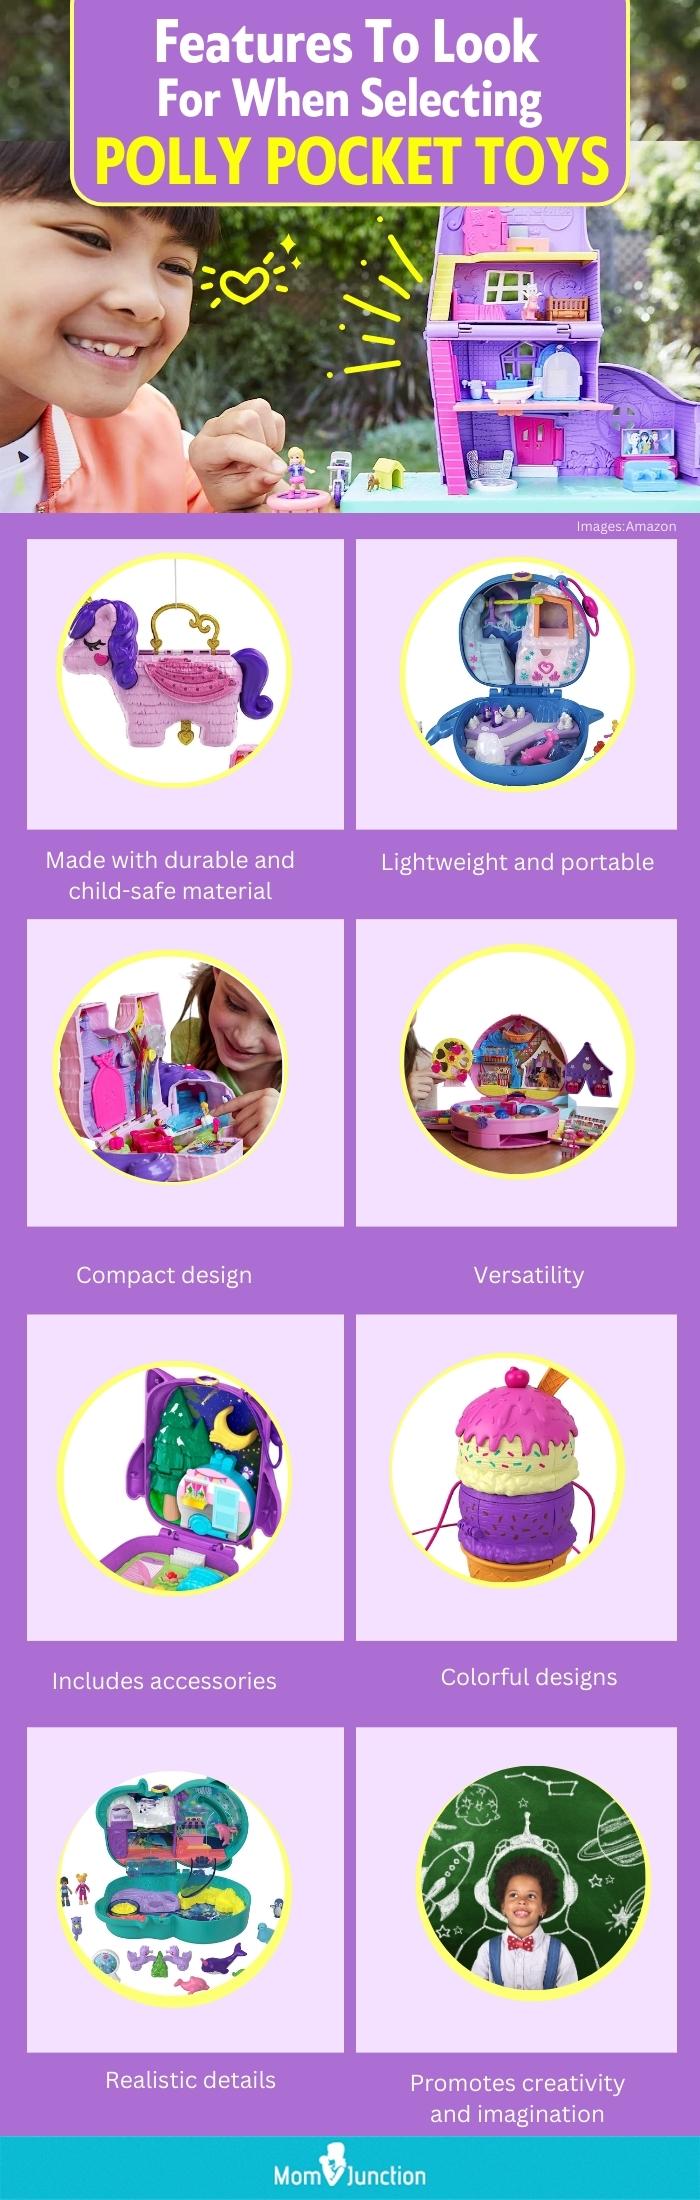 Features To Look For When Selecting Polly Pocket Toys (infographic)